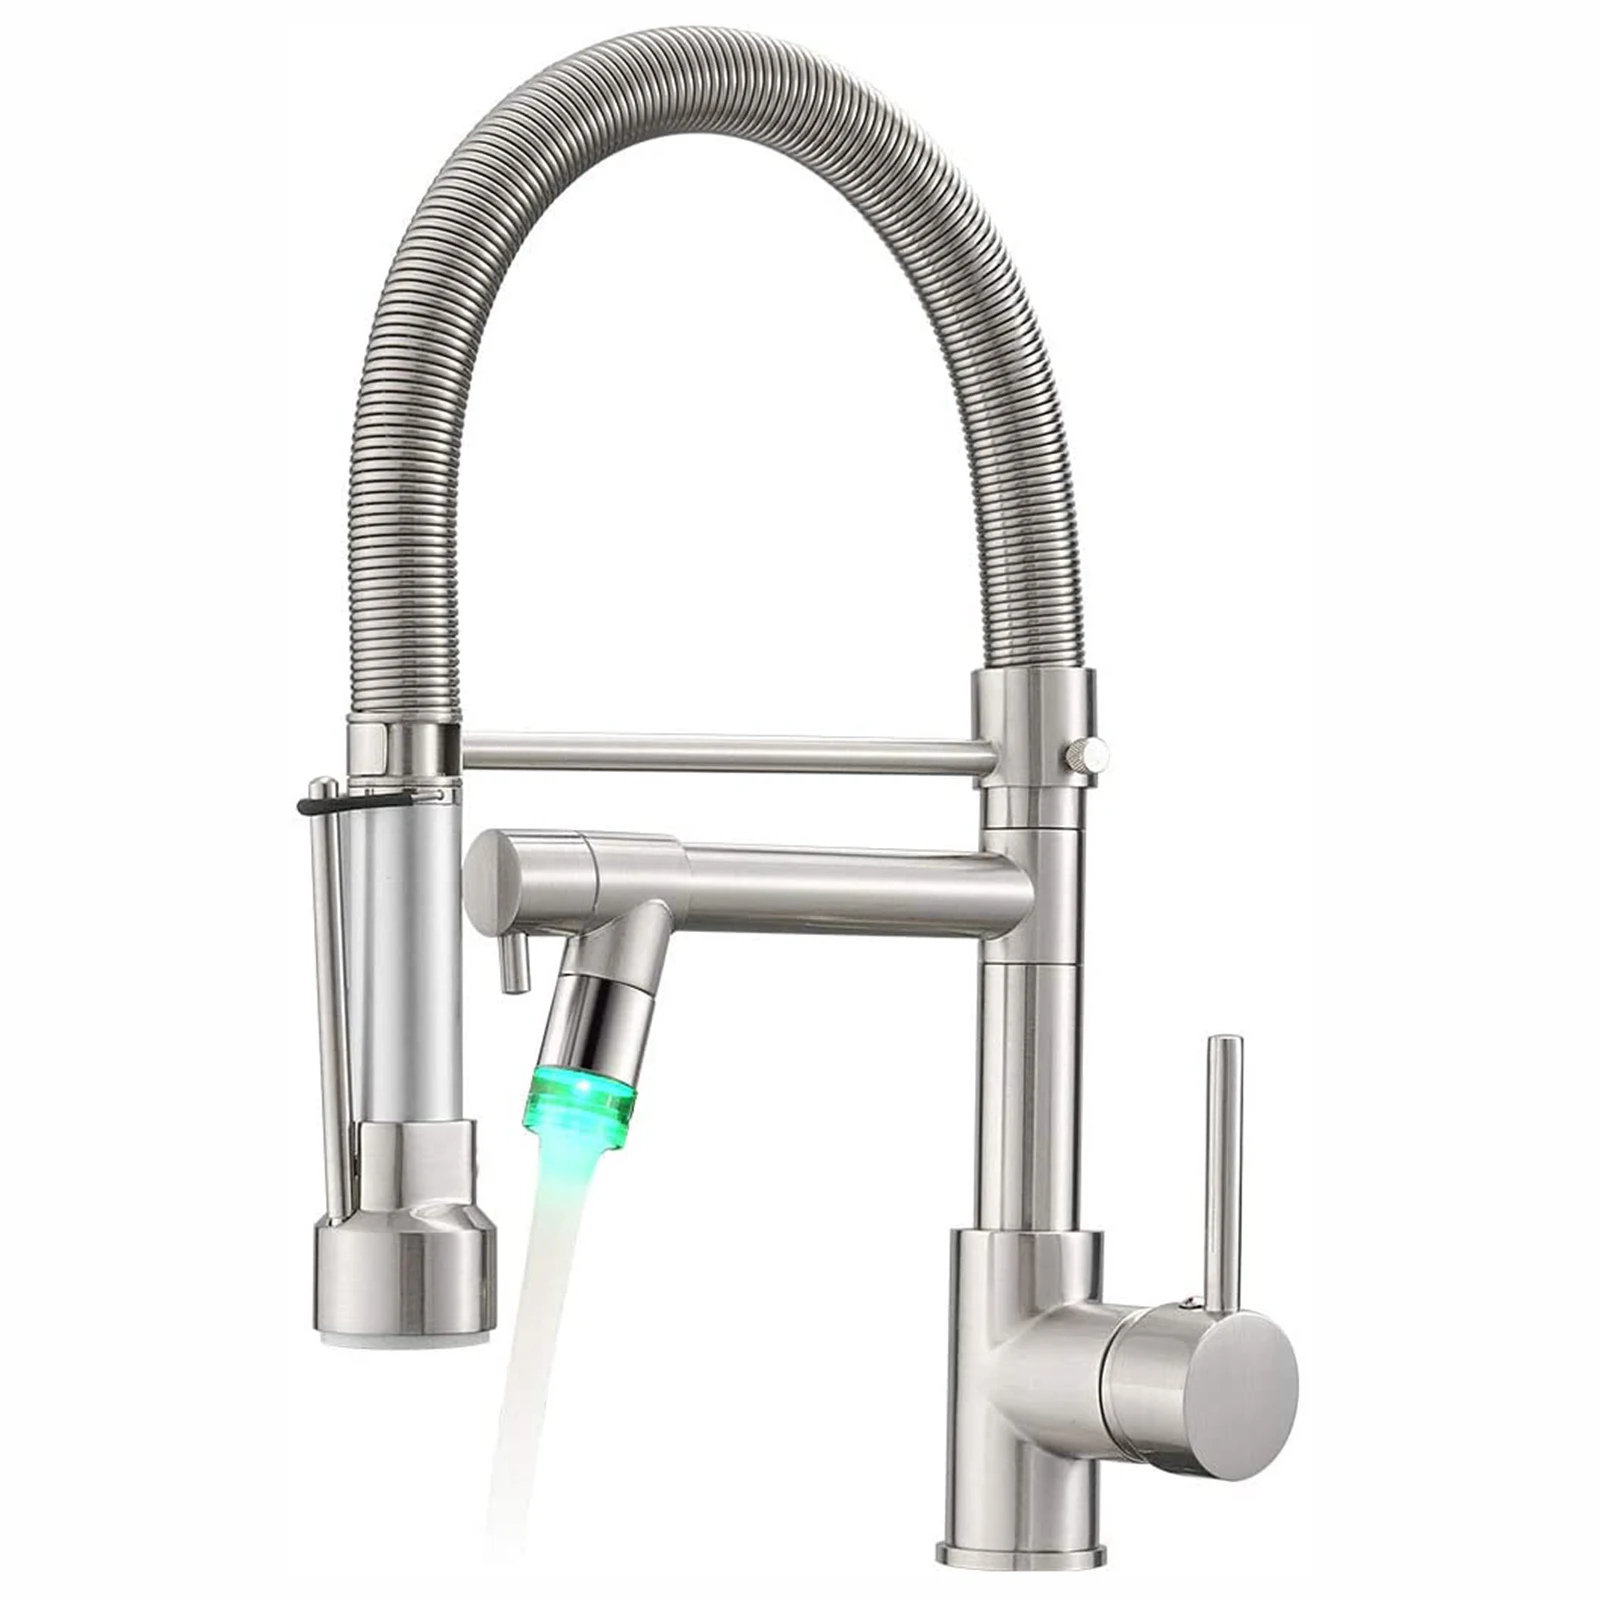 

TOP1 FLG Pull Down Kitchen Faucet with Lock Sprayer Single Handle Spring Stainless Steel Kitchen Sink Faucet Brushed Nickel